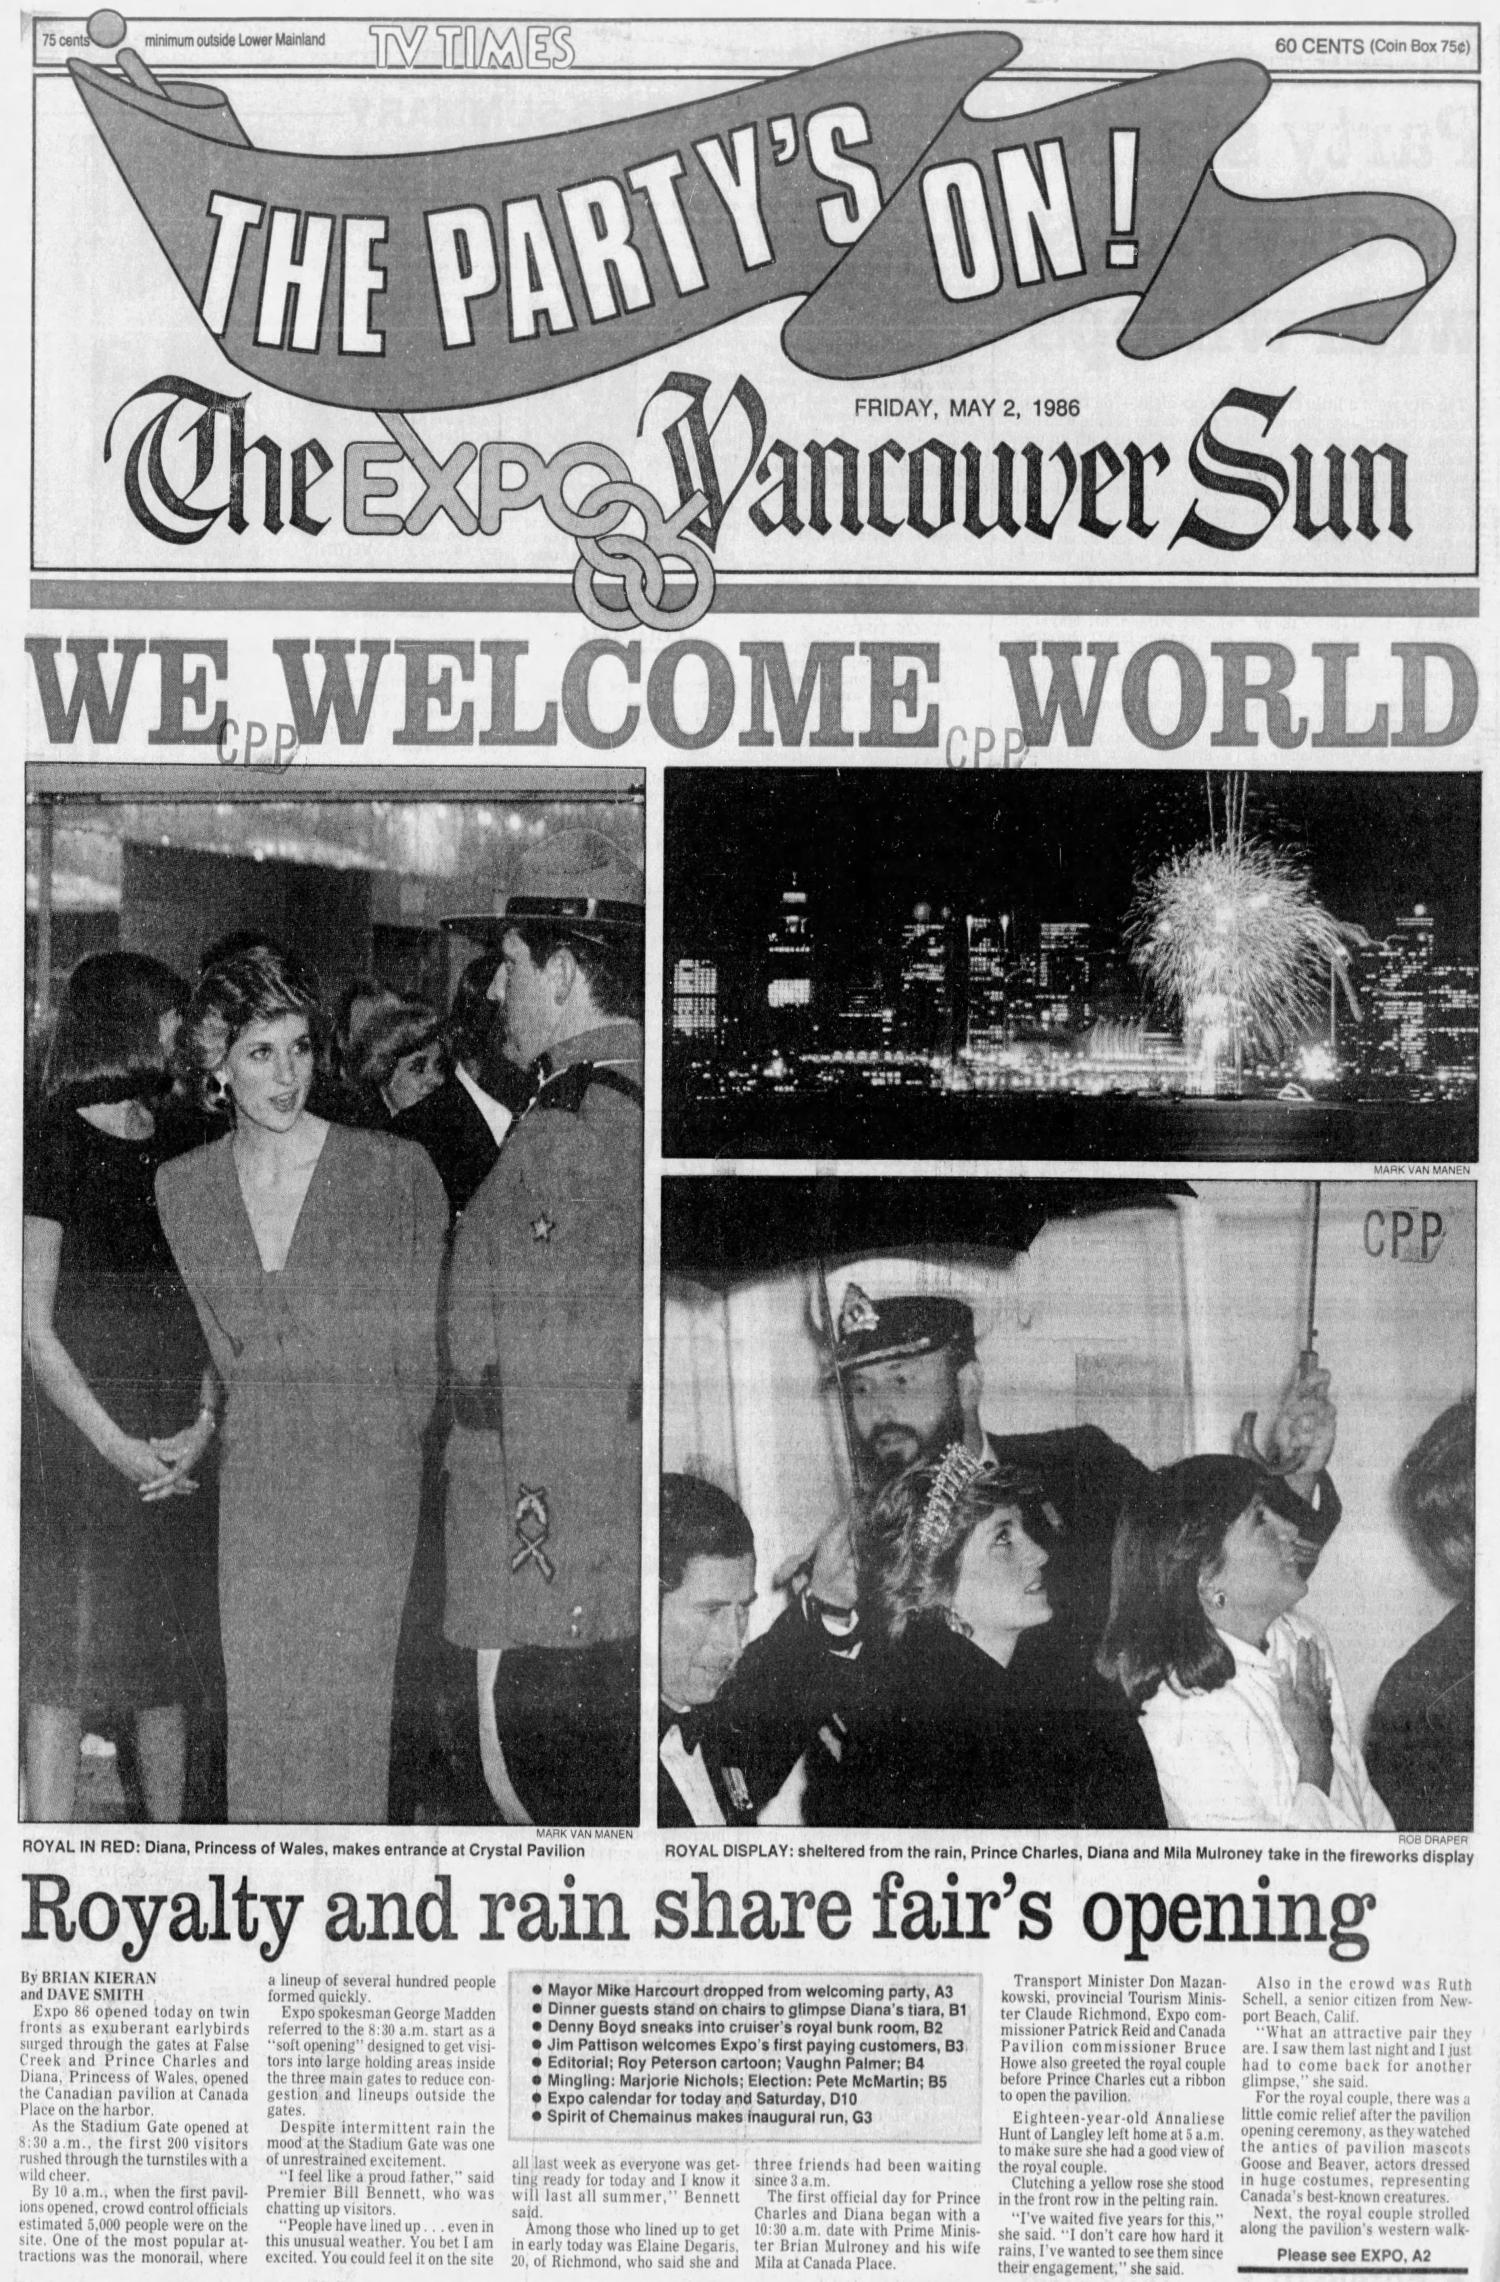 Front page of Vancouver Sun covering kick off of Expo 86.